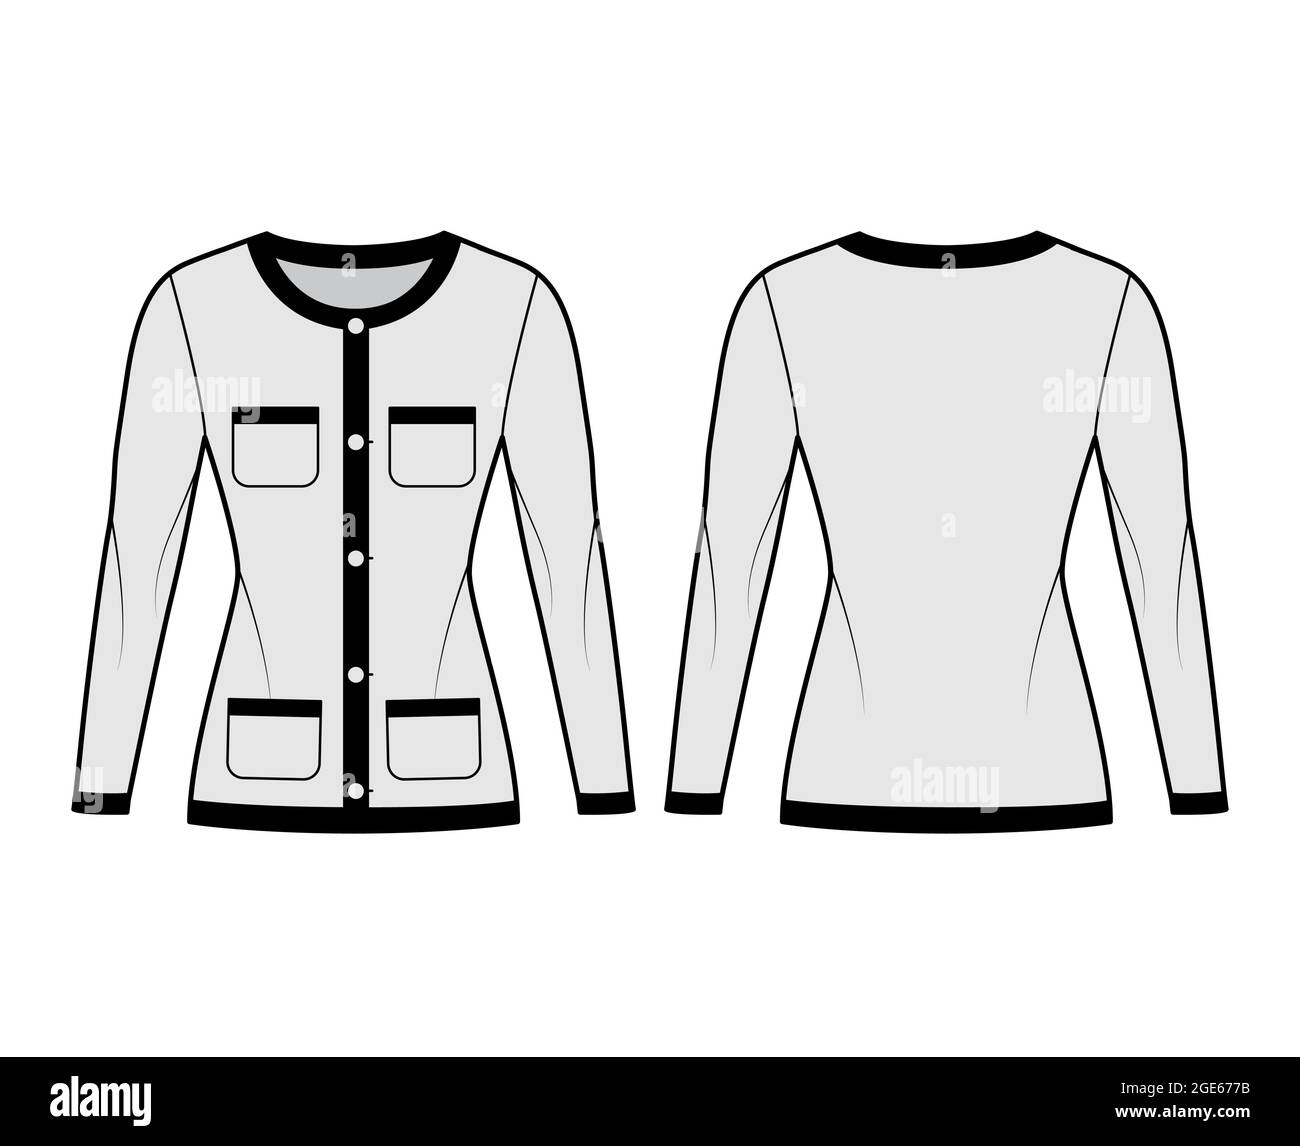 Chanel suit Cut Out Stock Images & Pictures - Alamy